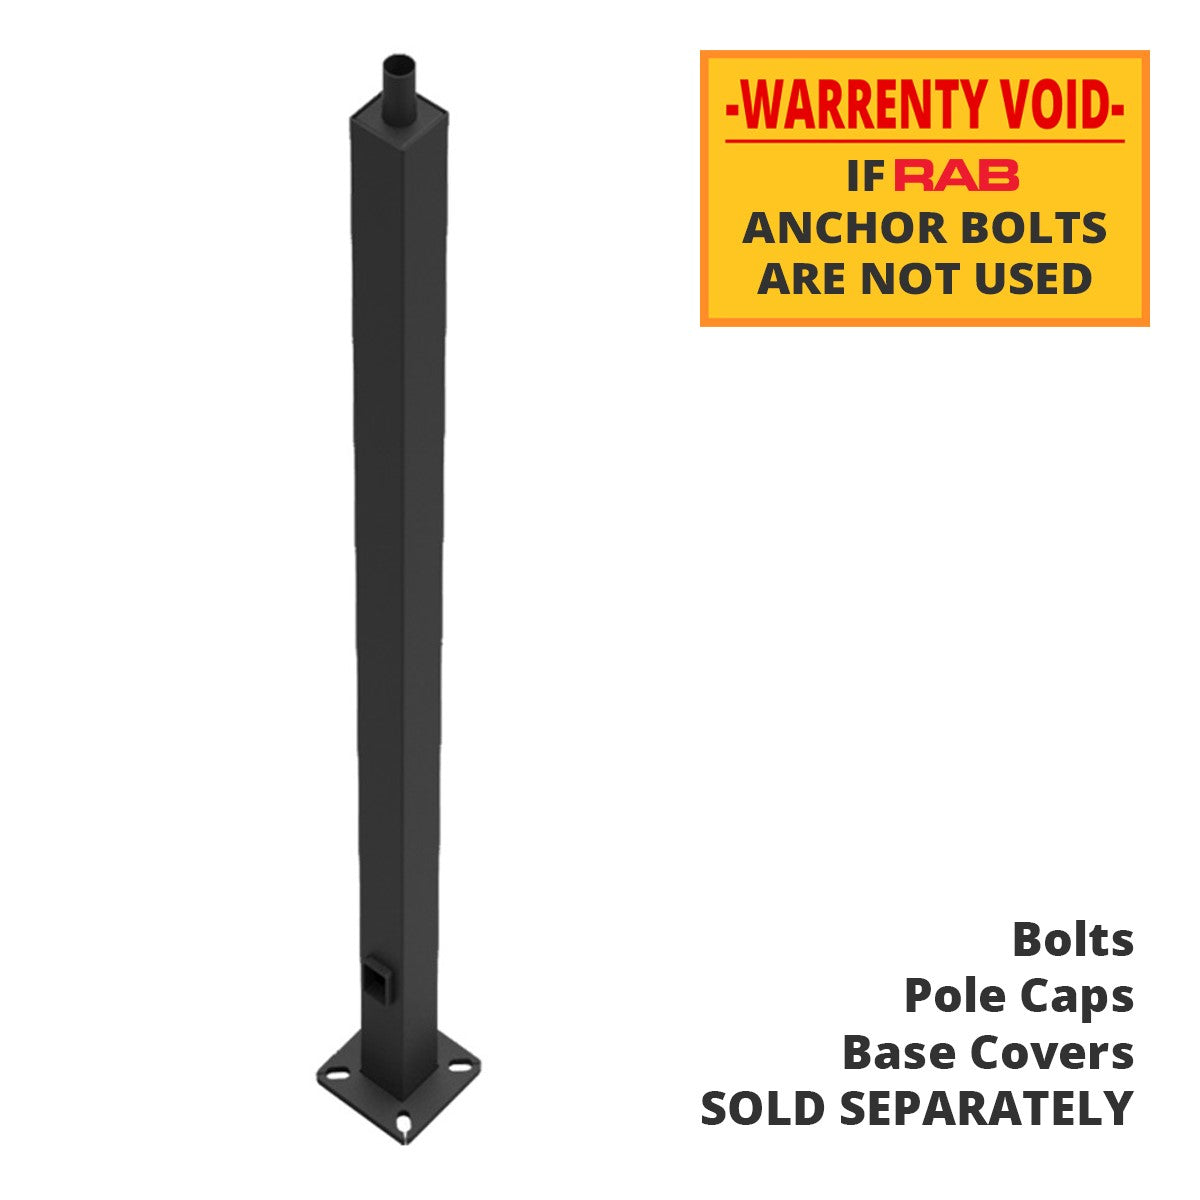 25 Ft Square Steel Tenon Top Pole 5 In. Shaft 7 Gauge